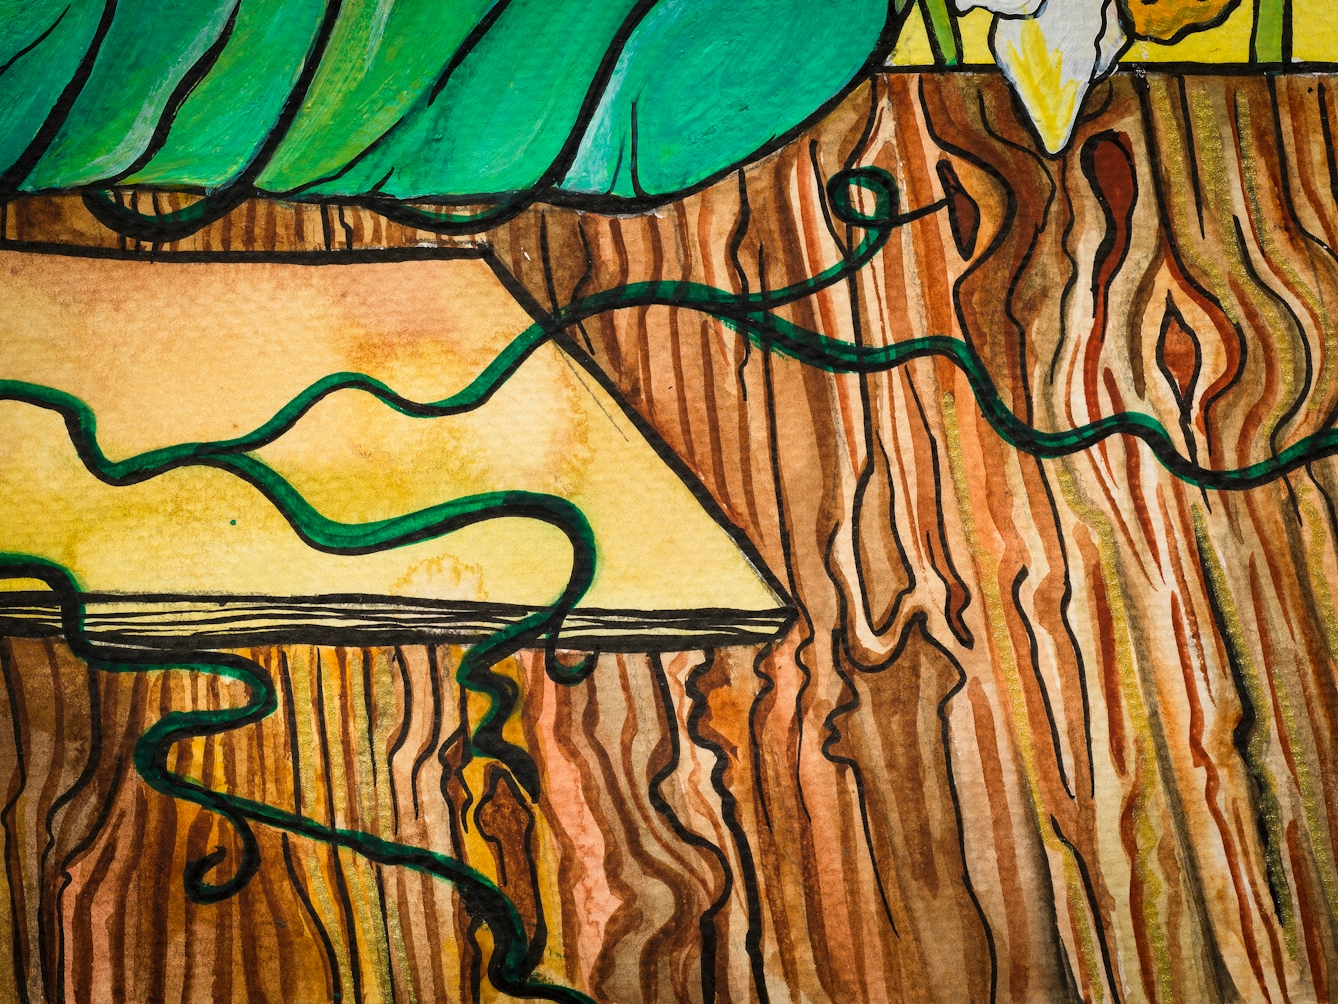 Detail from a larger colourful artwork. The artwork shows vines extending across a notebook page, onto a wooden table.